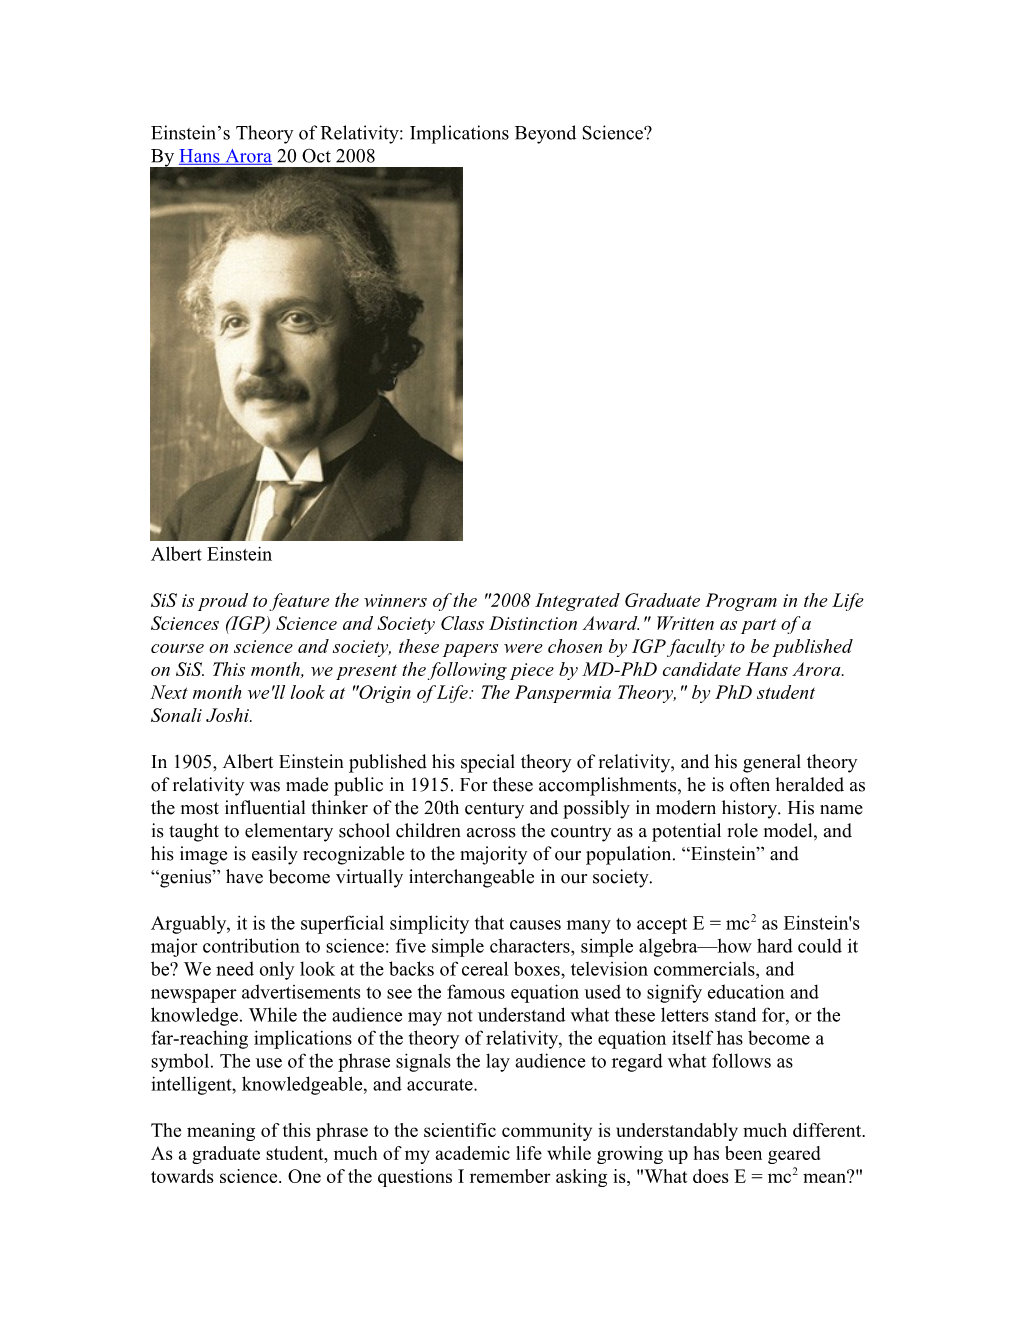 Einstein S Theory of Relativity: Implications Beyond Science